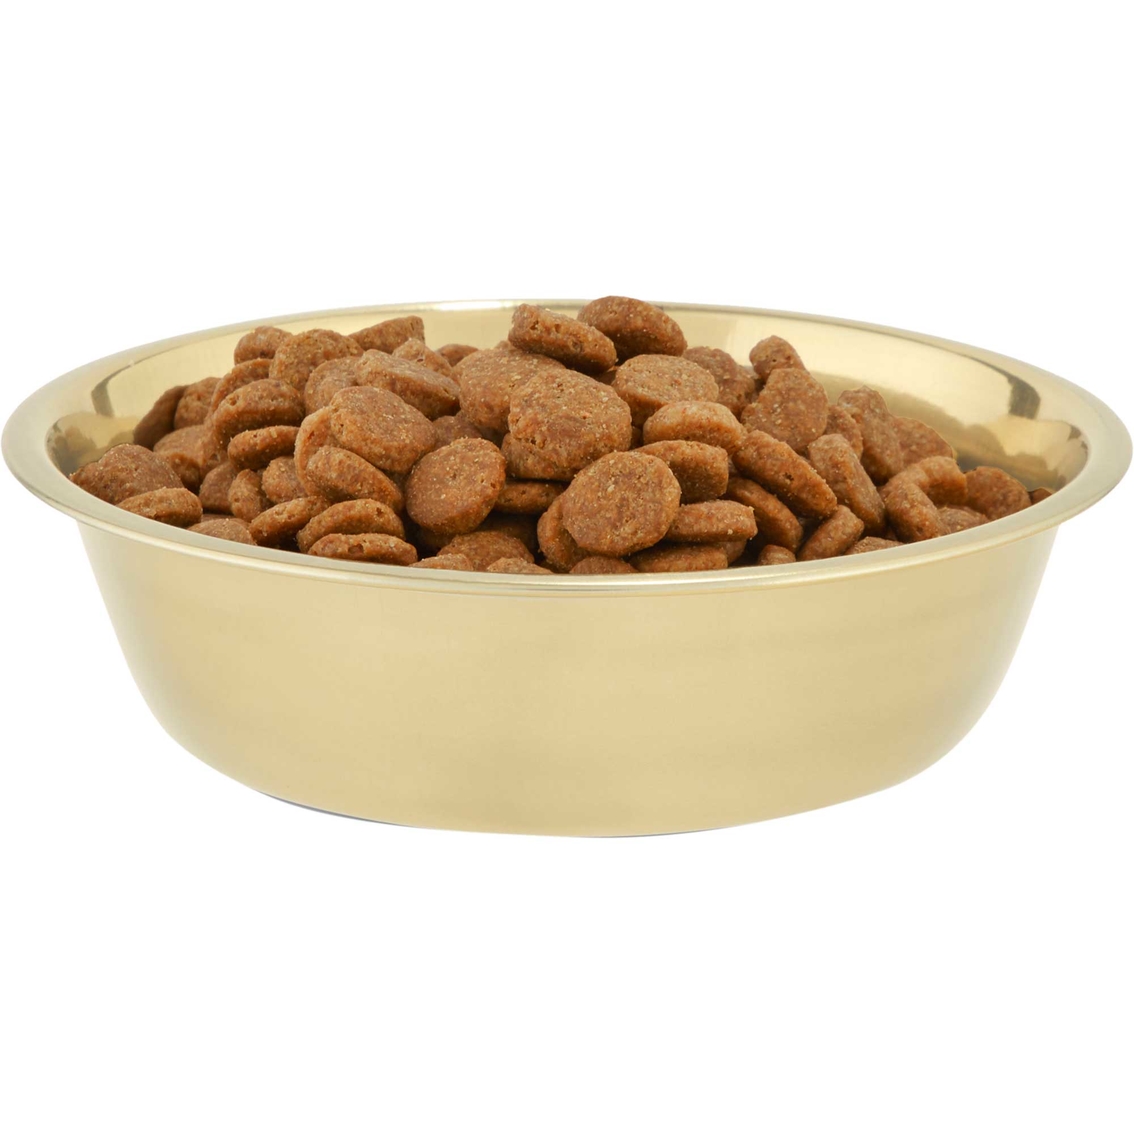 Harmony Gold Stainless Steel Dog Bowl - Image 2 of 2